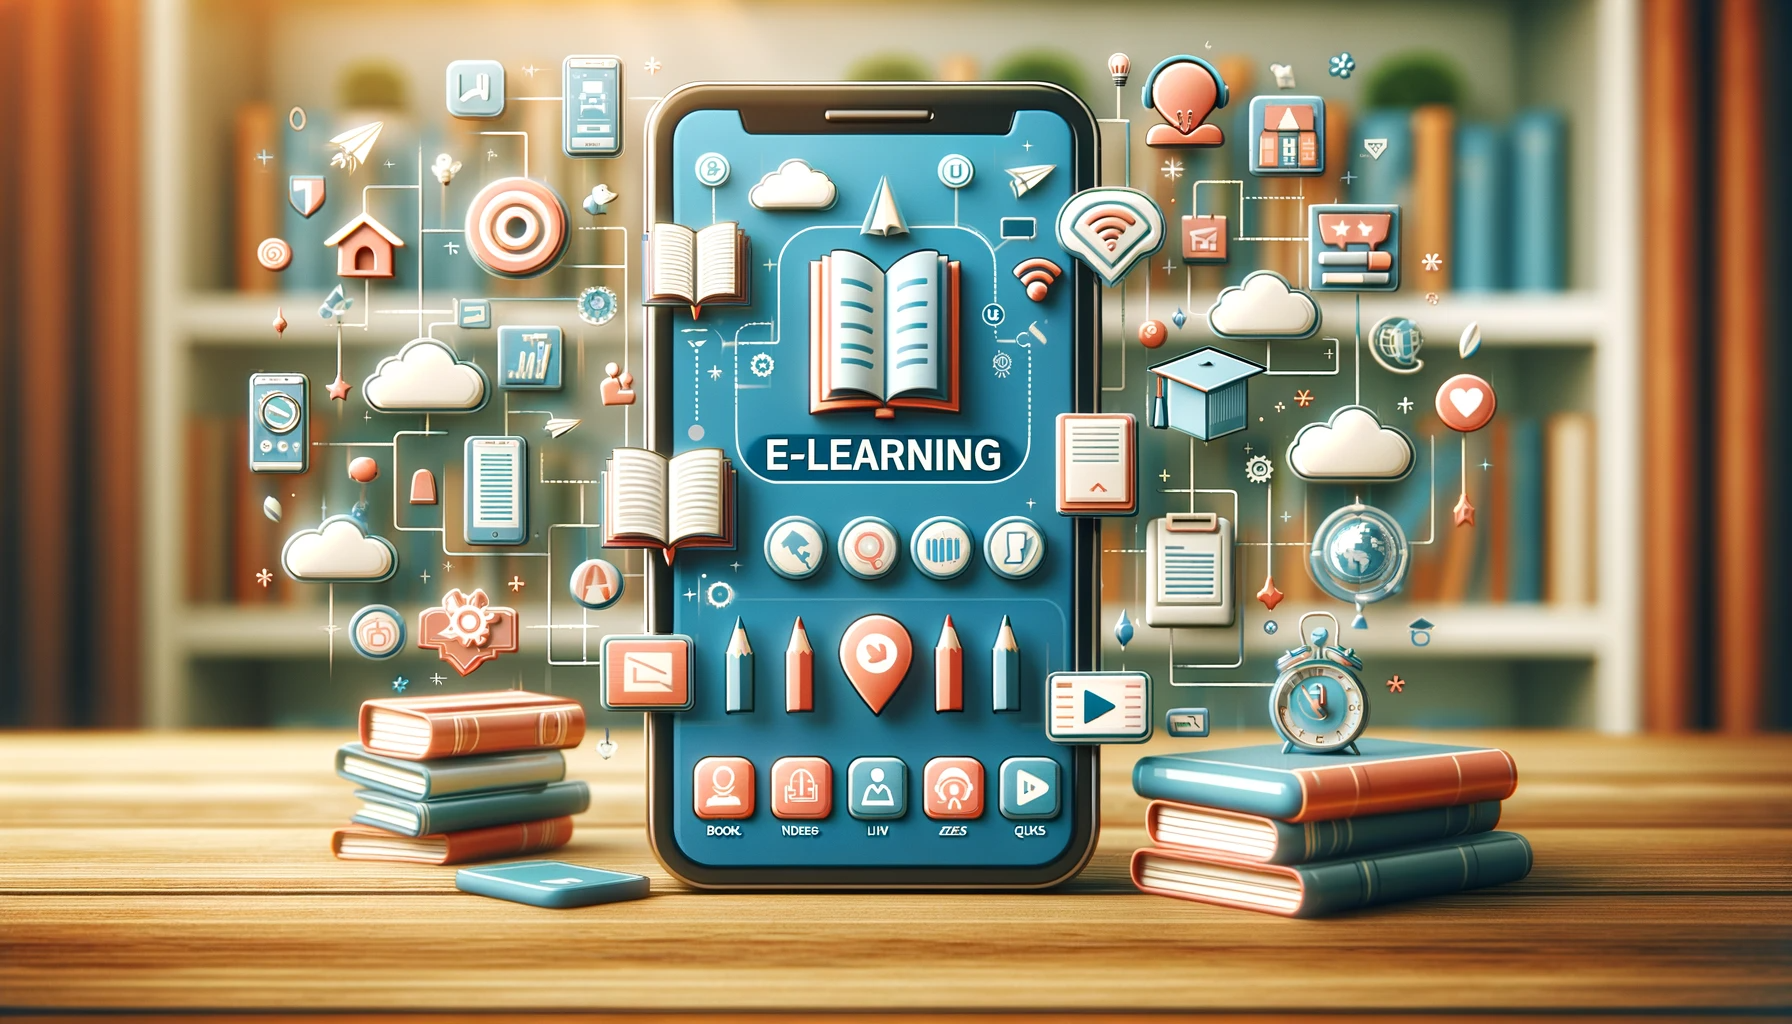 A conceptual landscape image of an E-Learning app